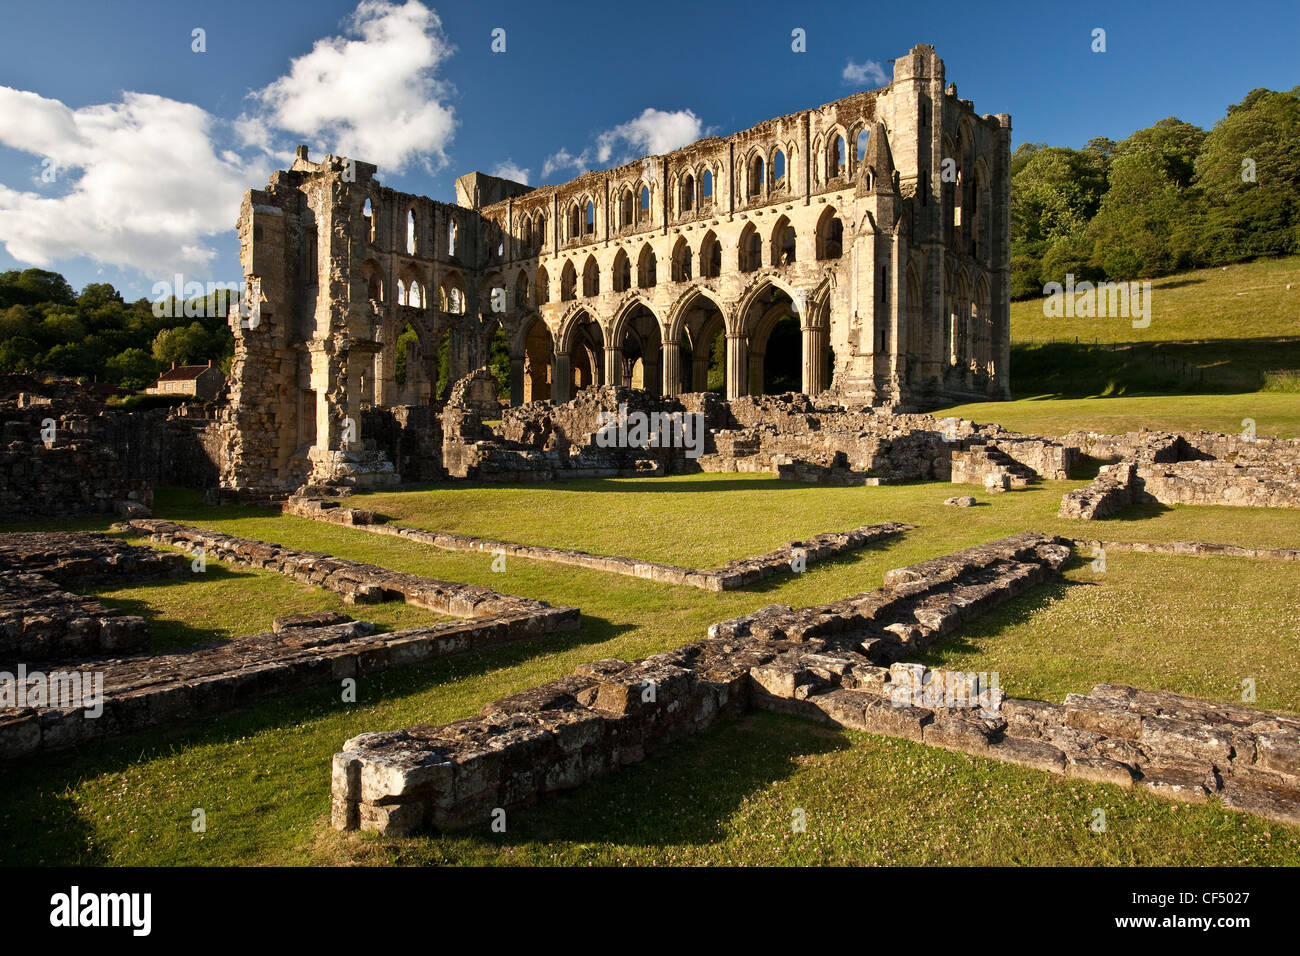 The ruins of Rievaulx Abbey, a former Cistercian abbey founded in 1132 and dissolved by Henry VIII in 1538. Stock Photo